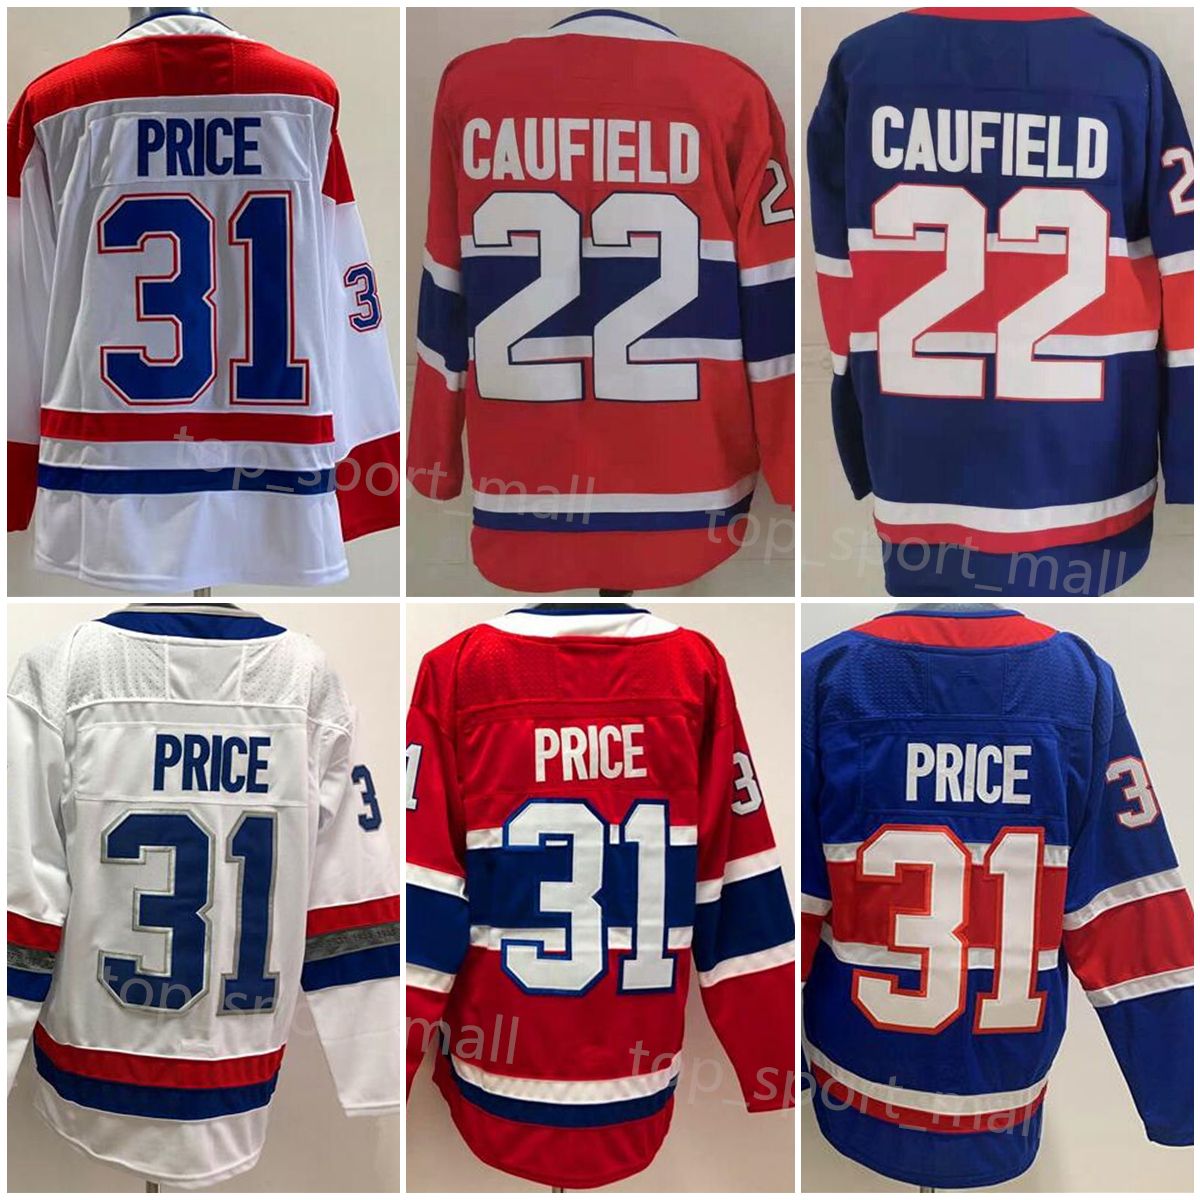 Canadiens come 5th in the Athletic's Reverse Retro jersey power